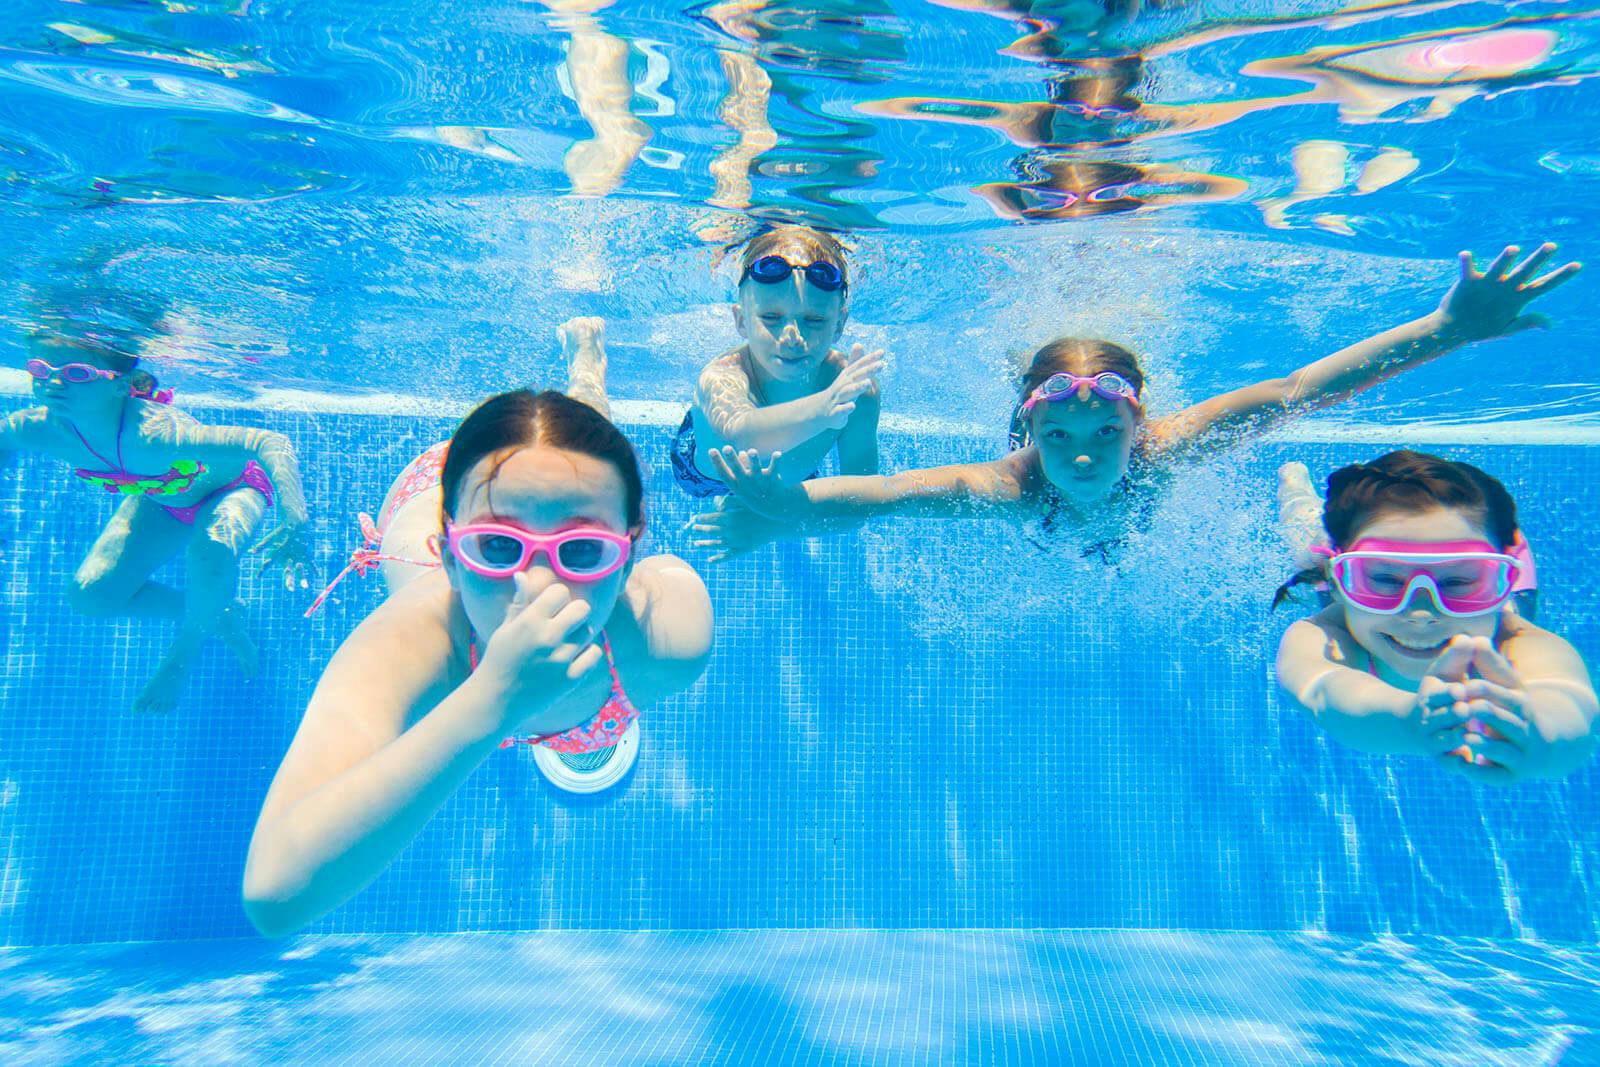 Young kids swimming in a pool with their swim gear.